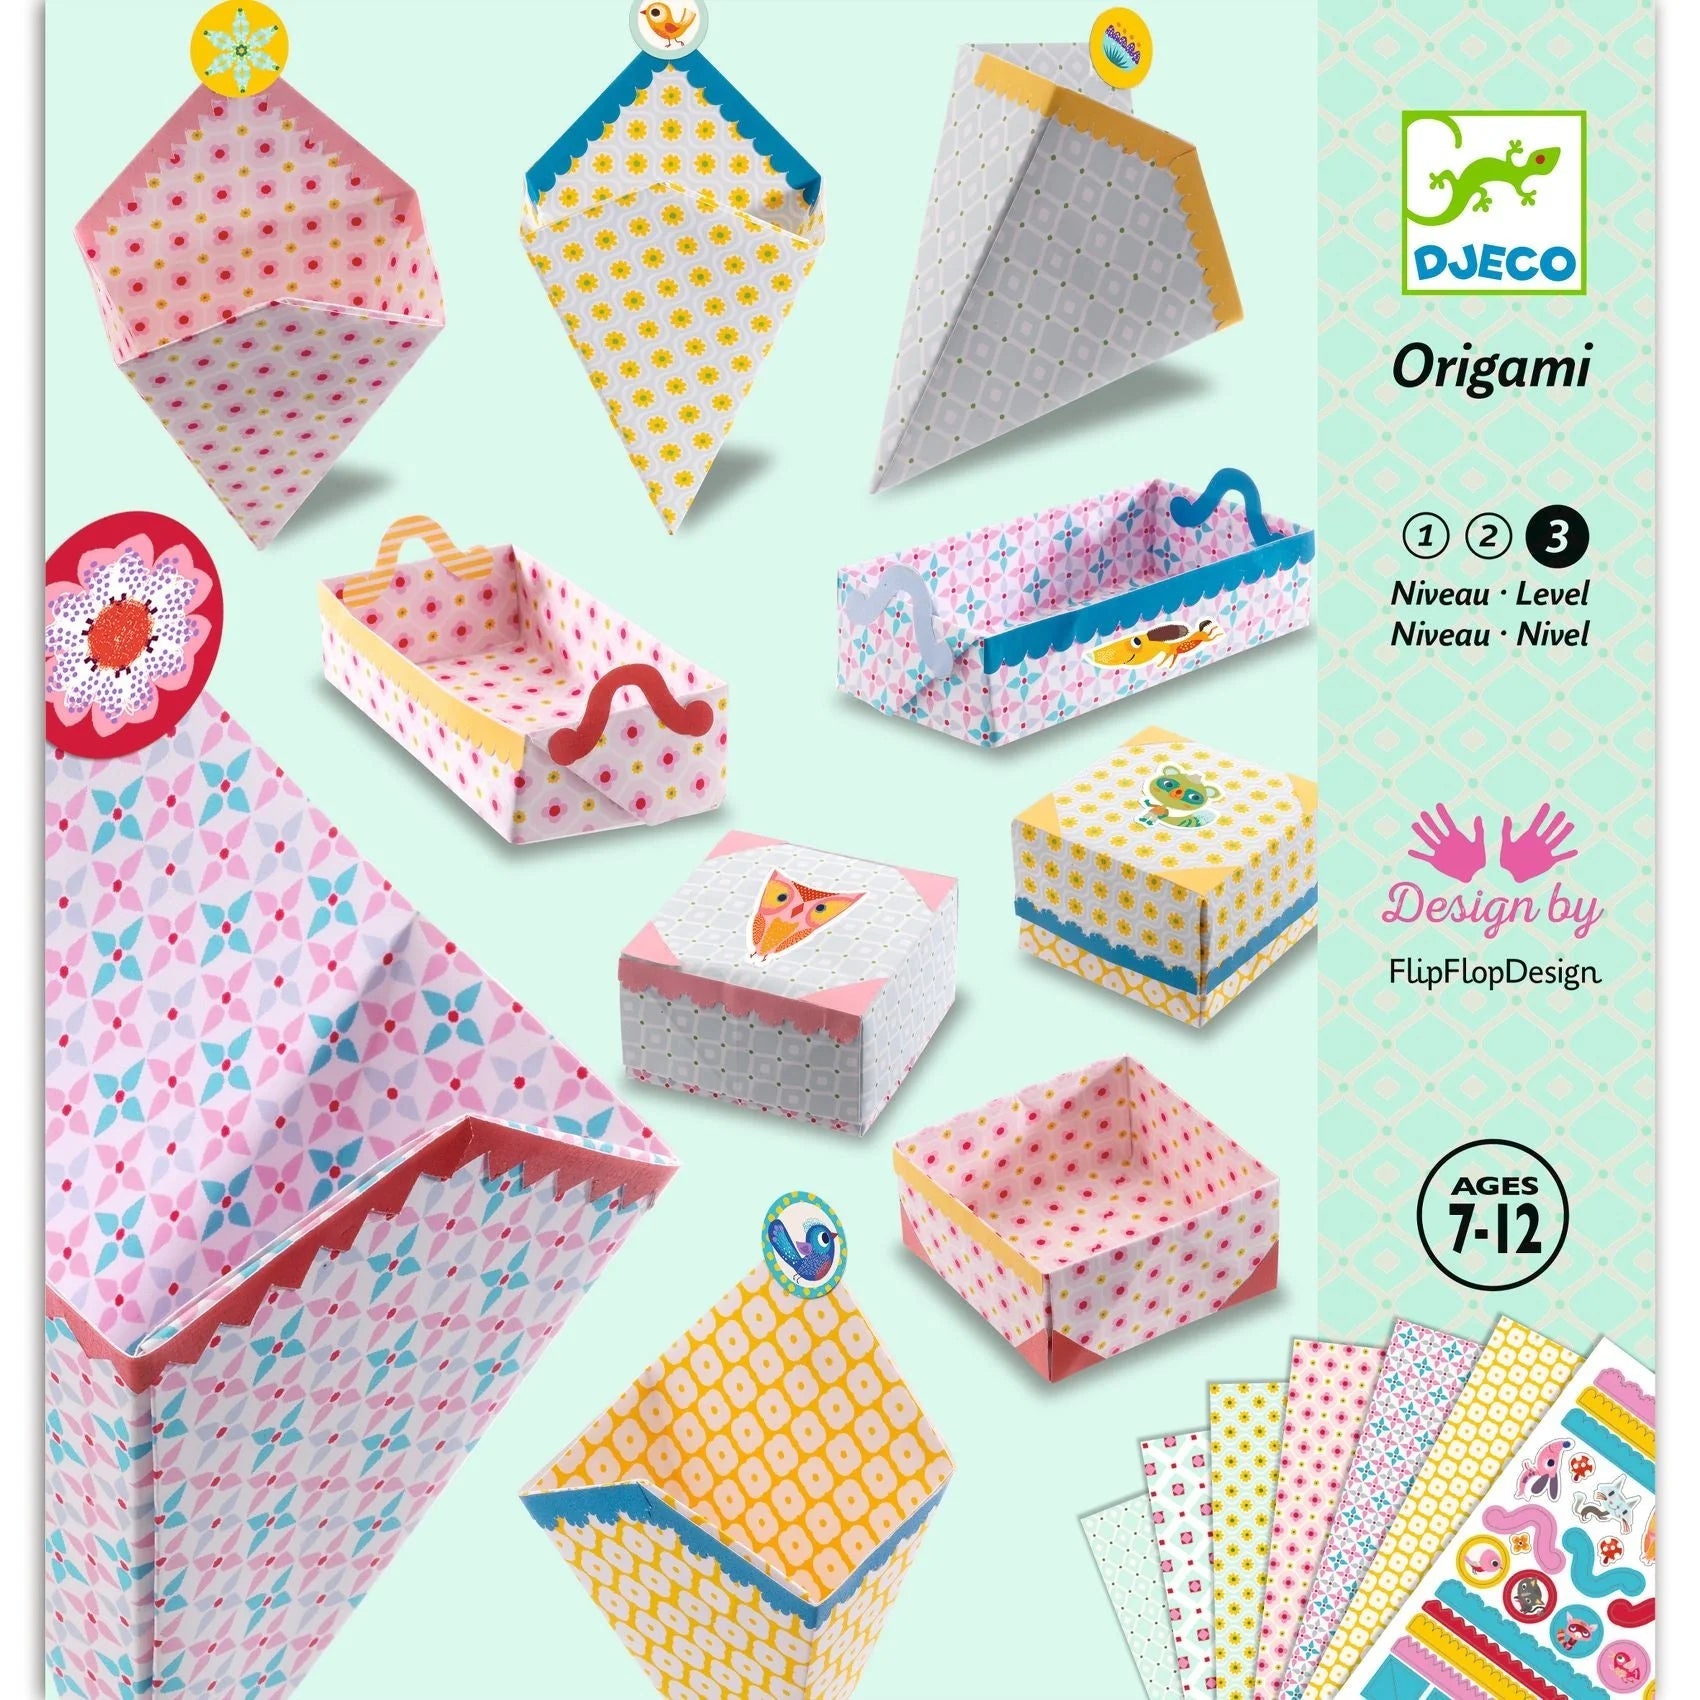 Djeco Origami Paper Craft Kit -- Small Boxes